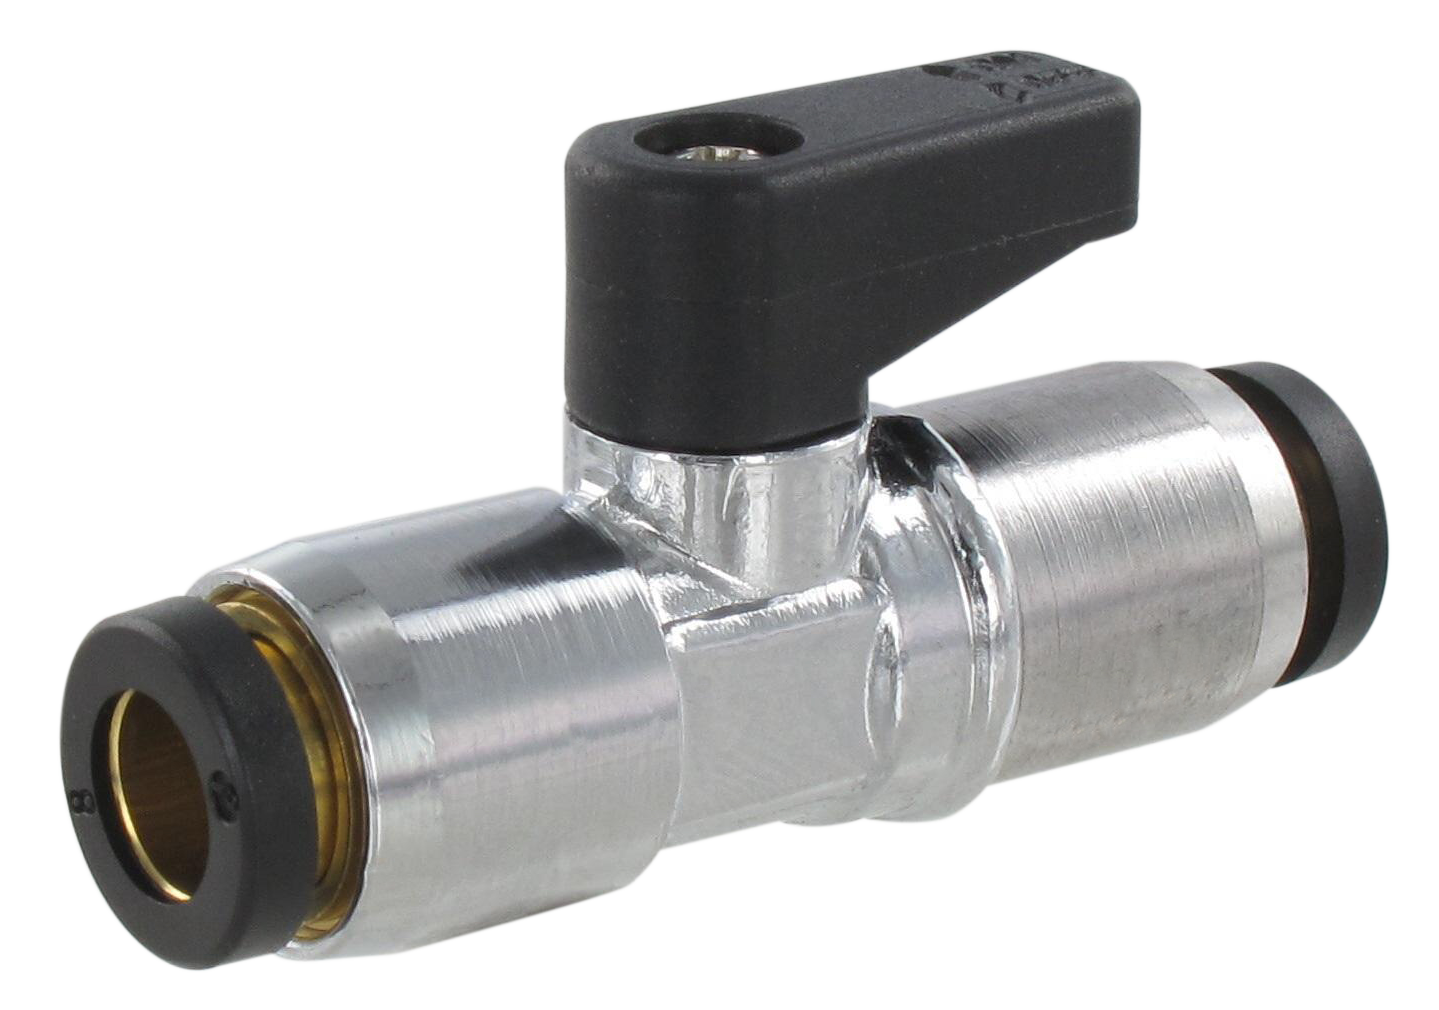 Push-in connections ball valve T8 Nickel-plated brass ball valves